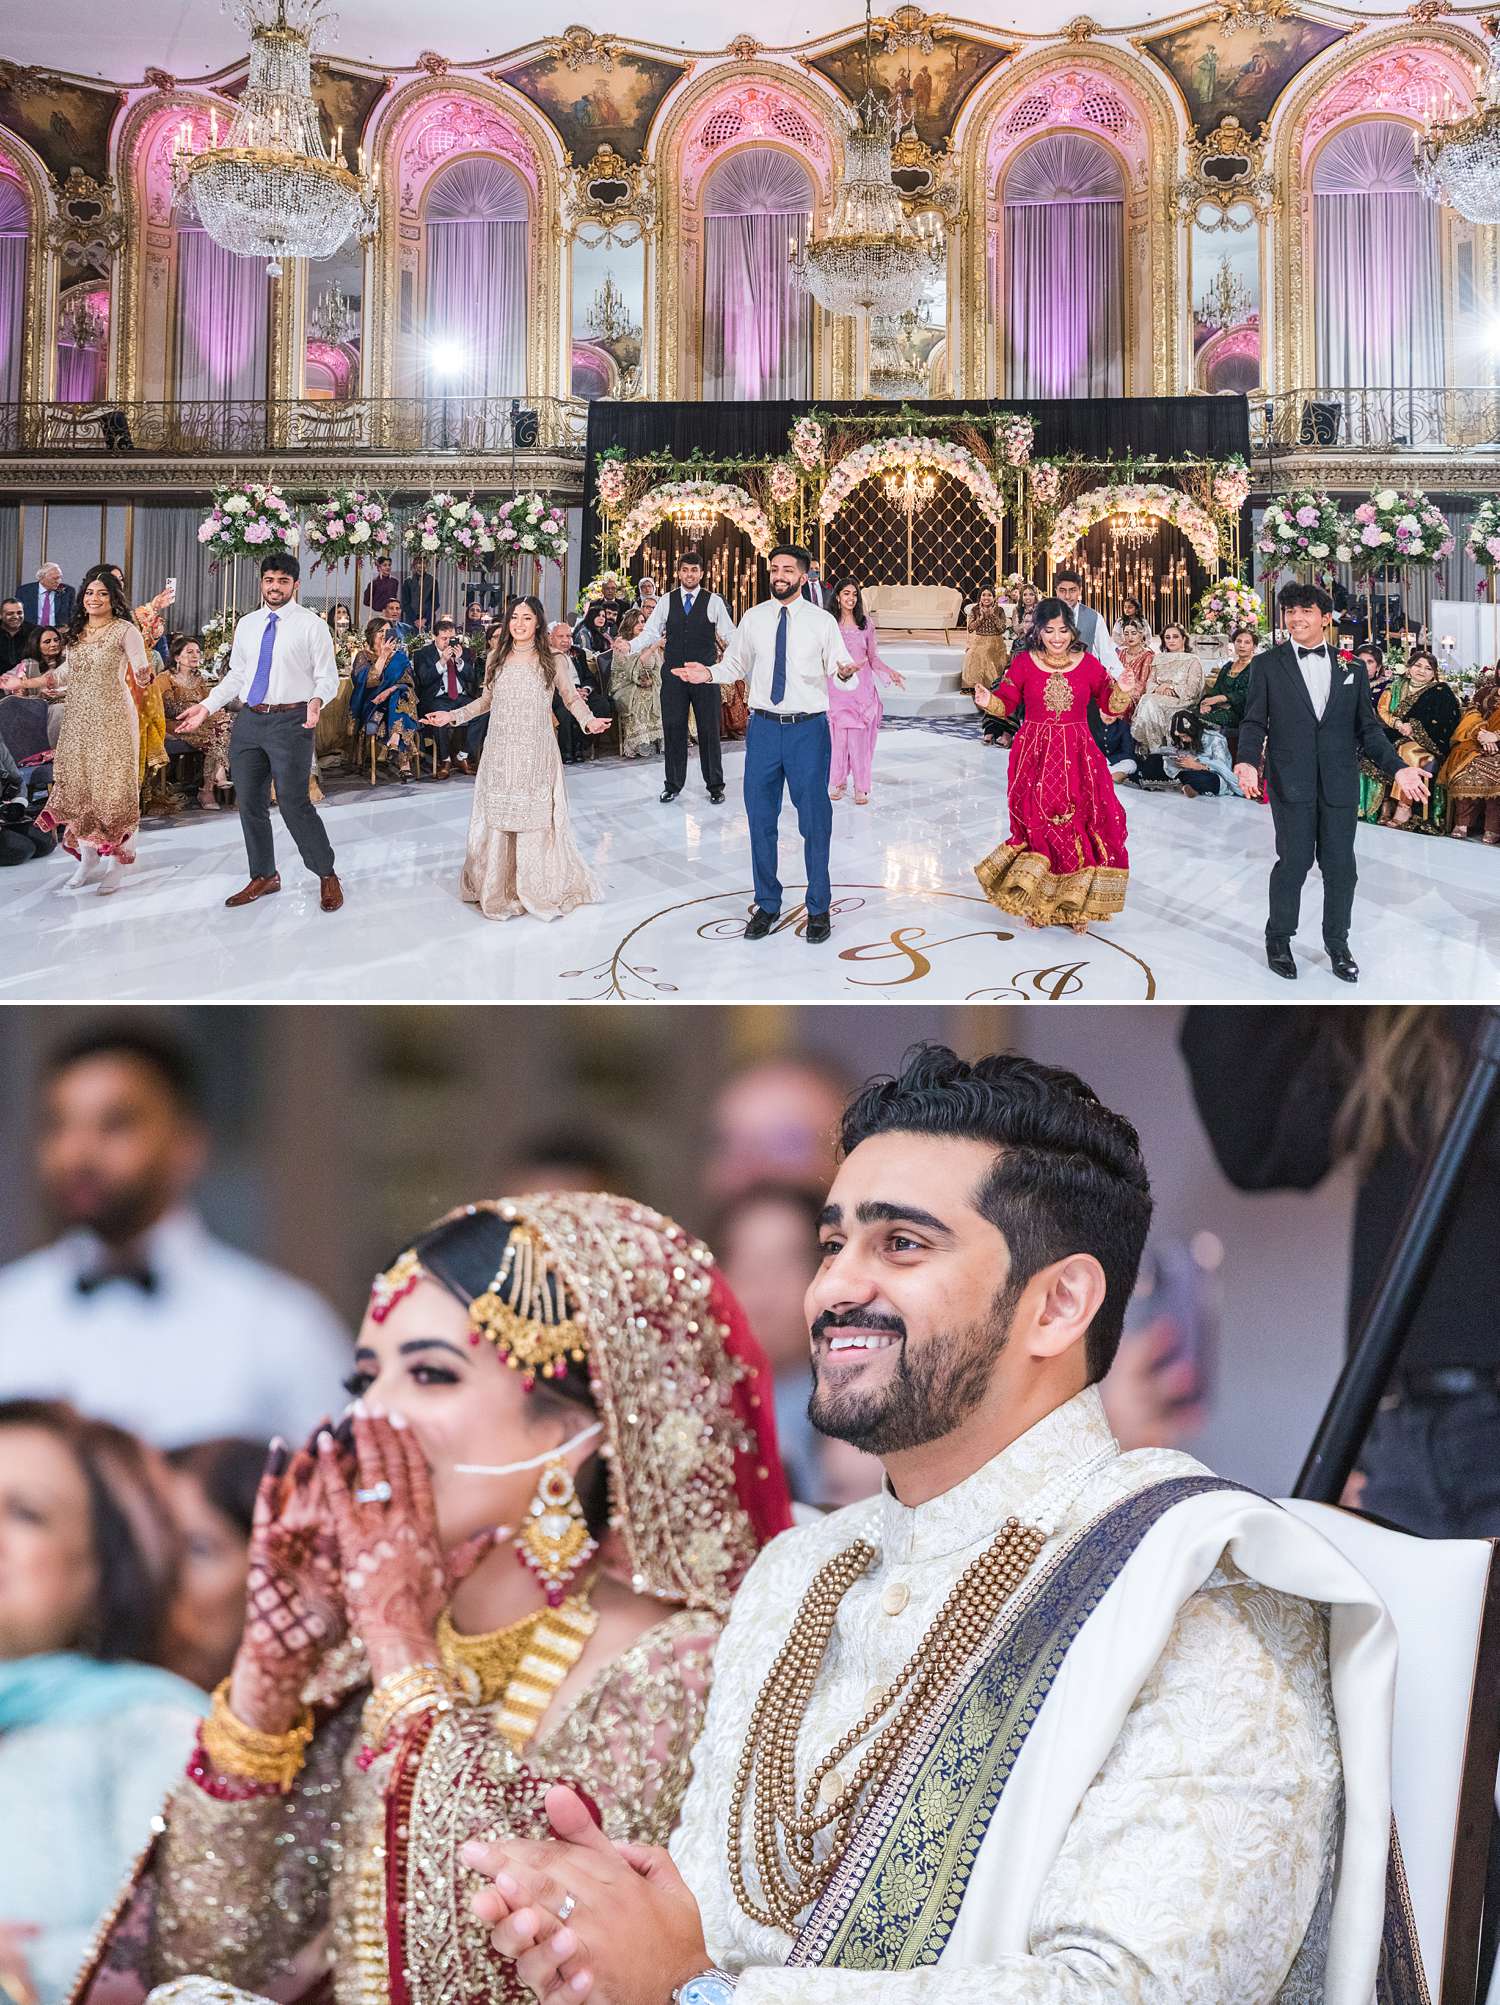 Pakistani bride and groom clapping and watching wedding dance performances at chicago wedding venue